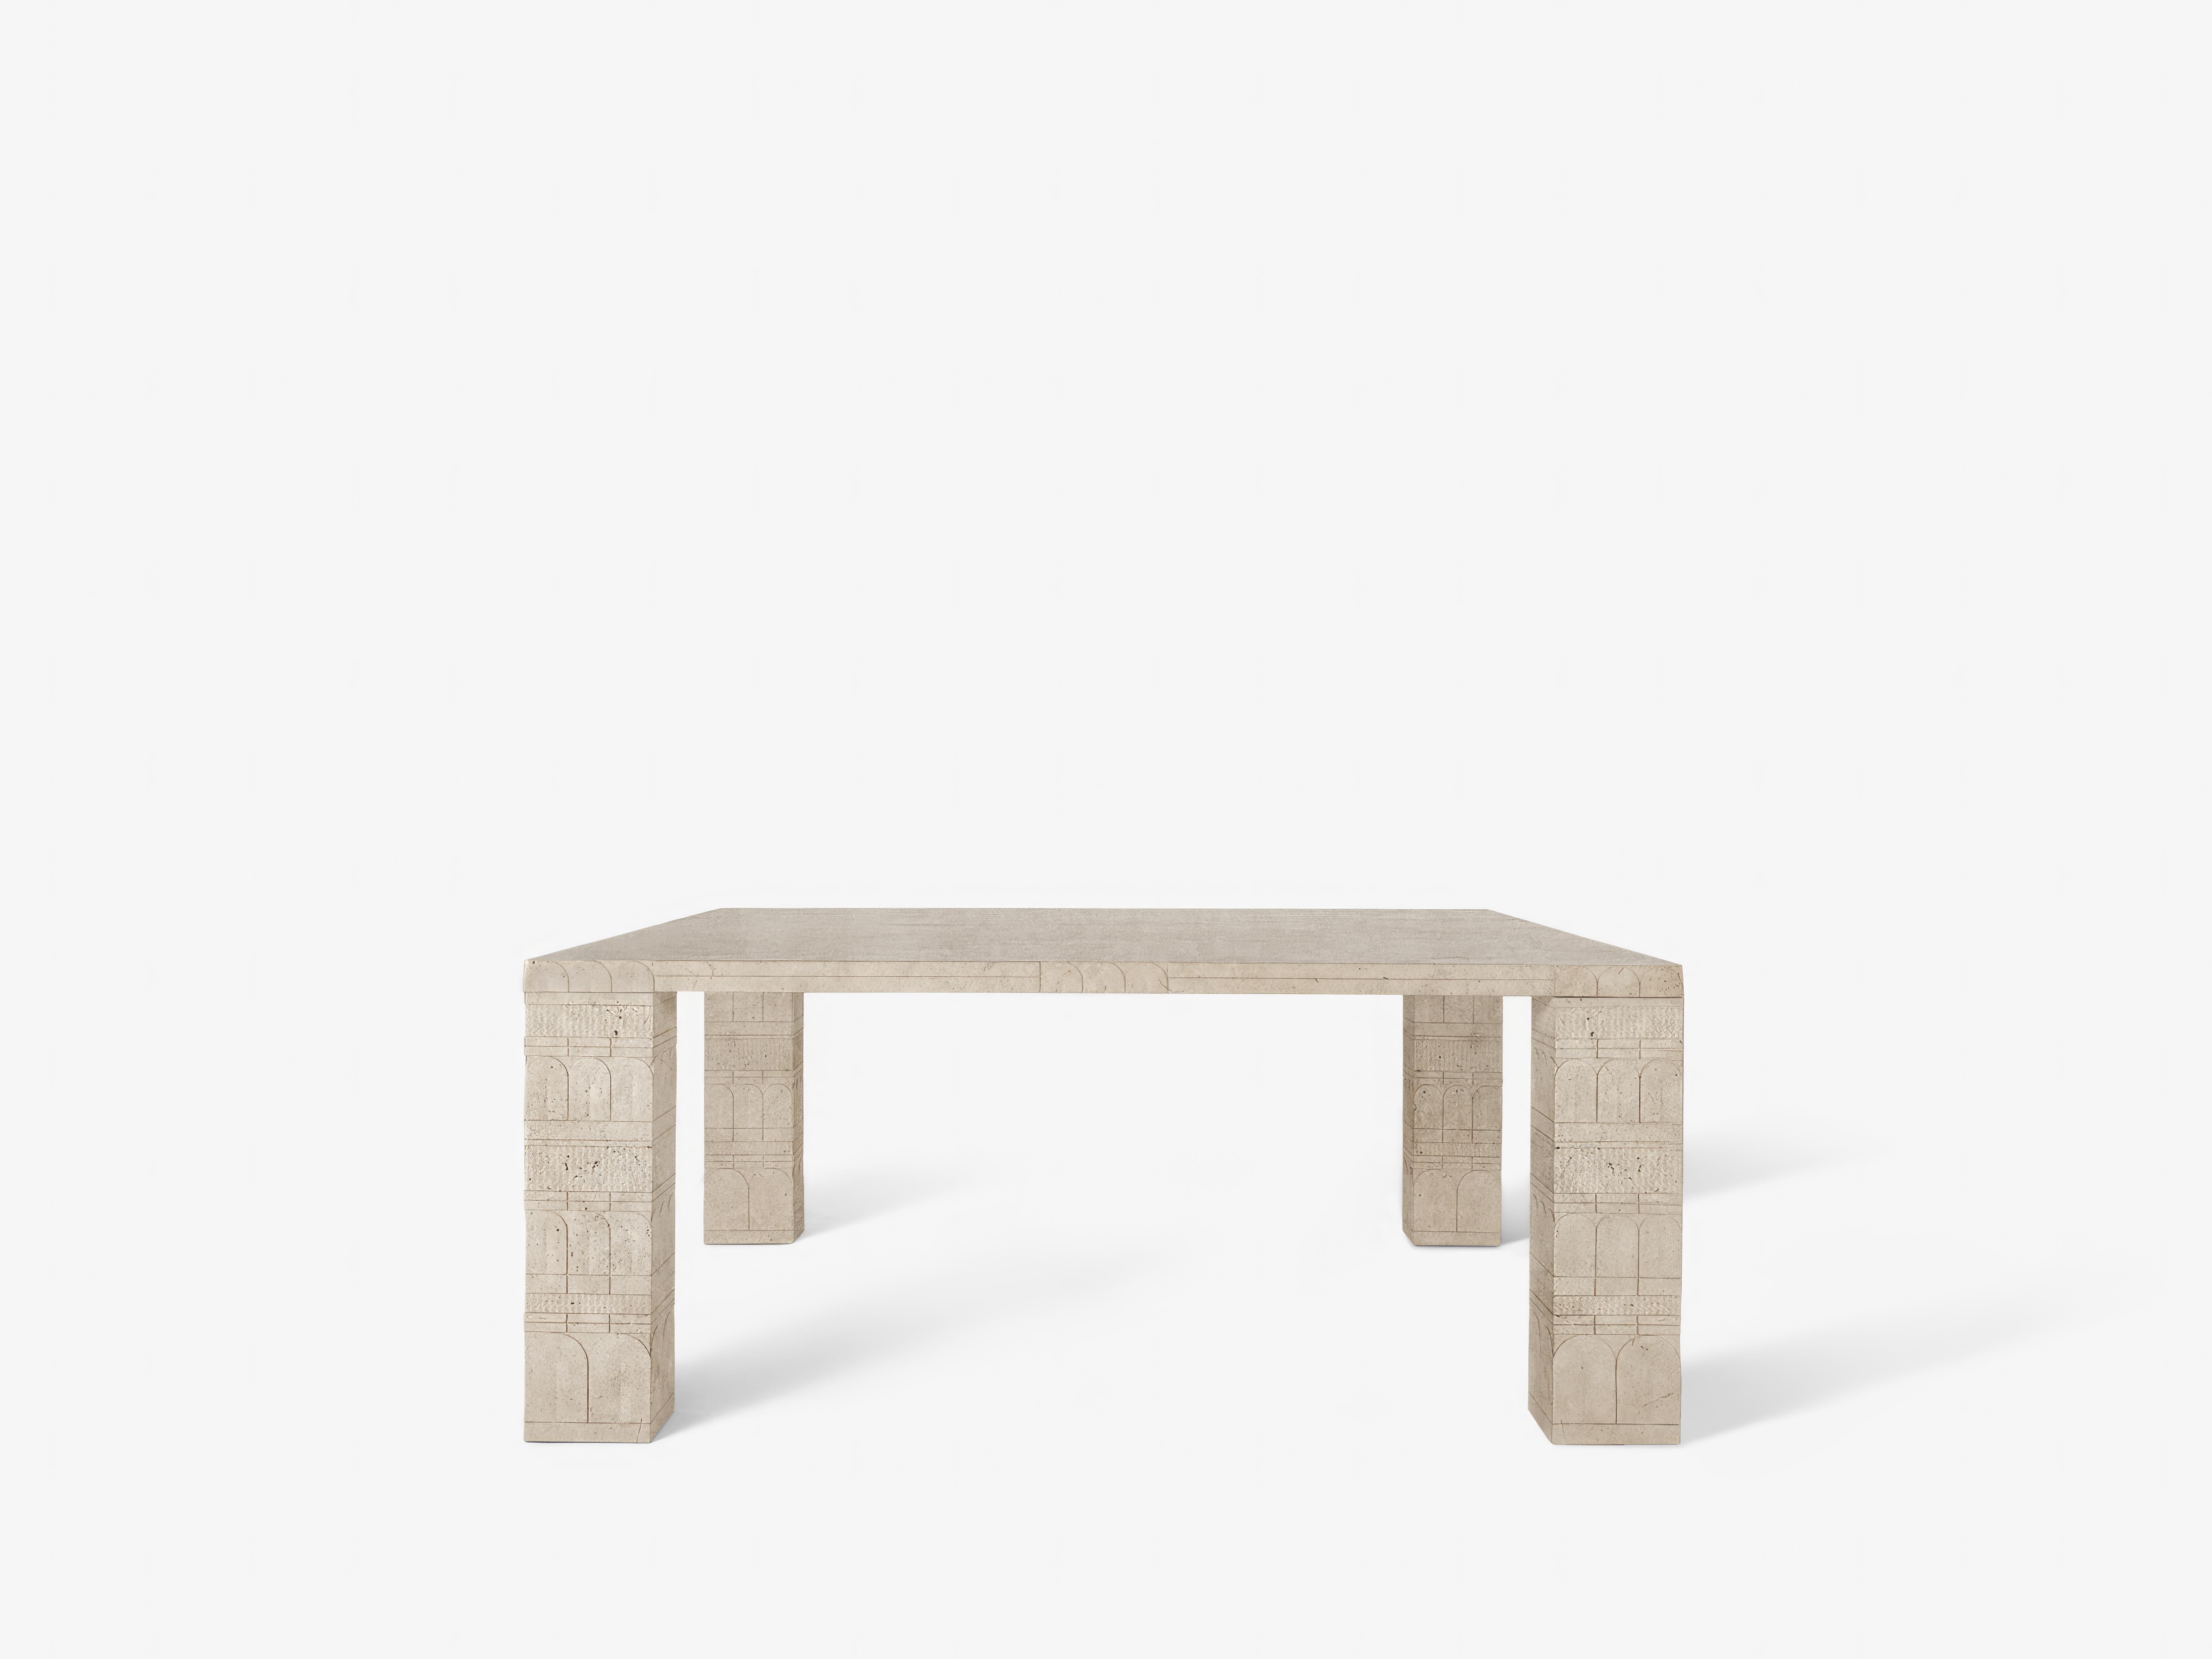 Landin Dining Table by OHLA STUDIO
Dimensions: D 180 x W 180 x H 76 cm 
Materials: Travertine de Veracruz.
Weight:420 kg

This collection draws upon the earliest known works of representational art. From crude symbols painstakingly chipped into cave